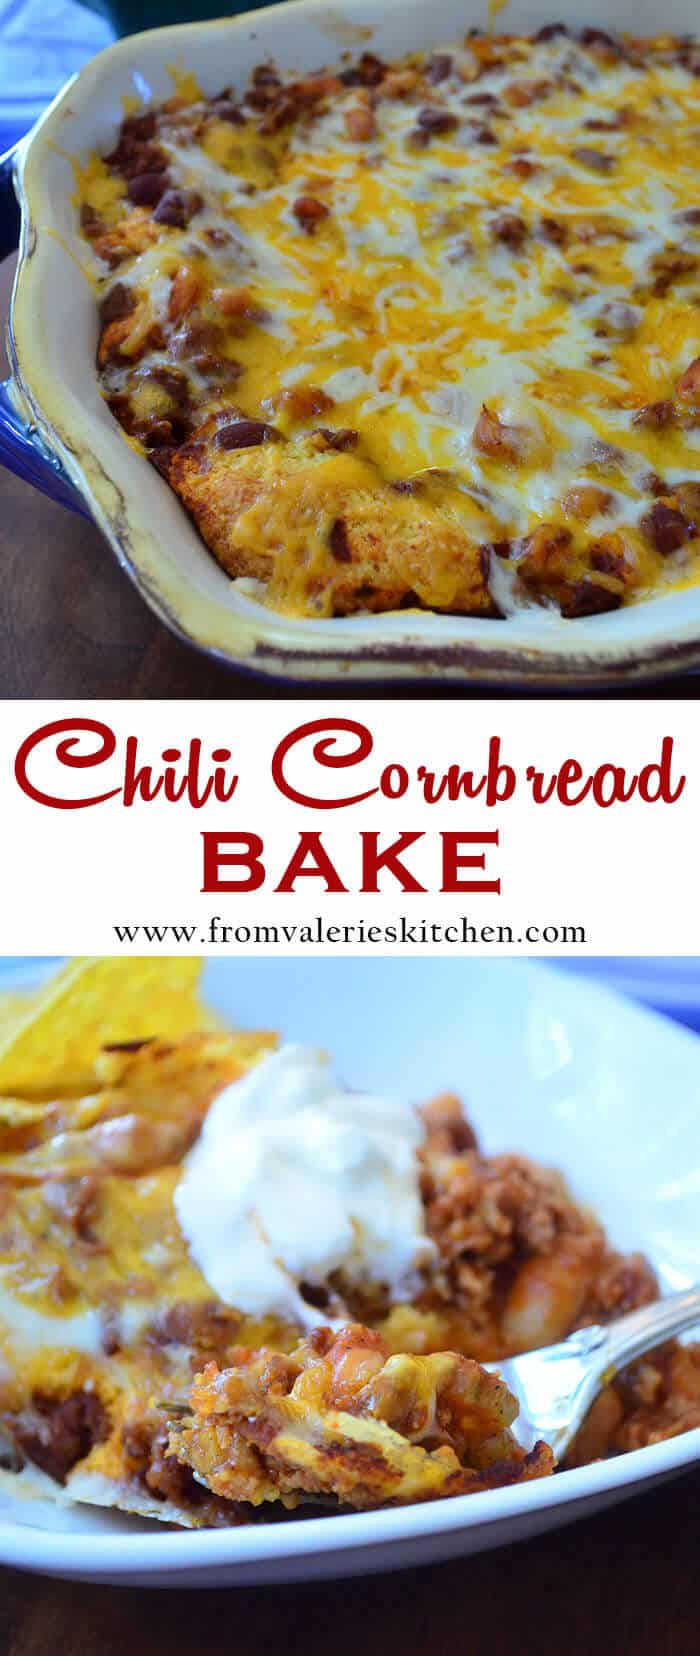 A two image vertical collage of Chili Cornbread Bake in a serving dish and on a small white plate.